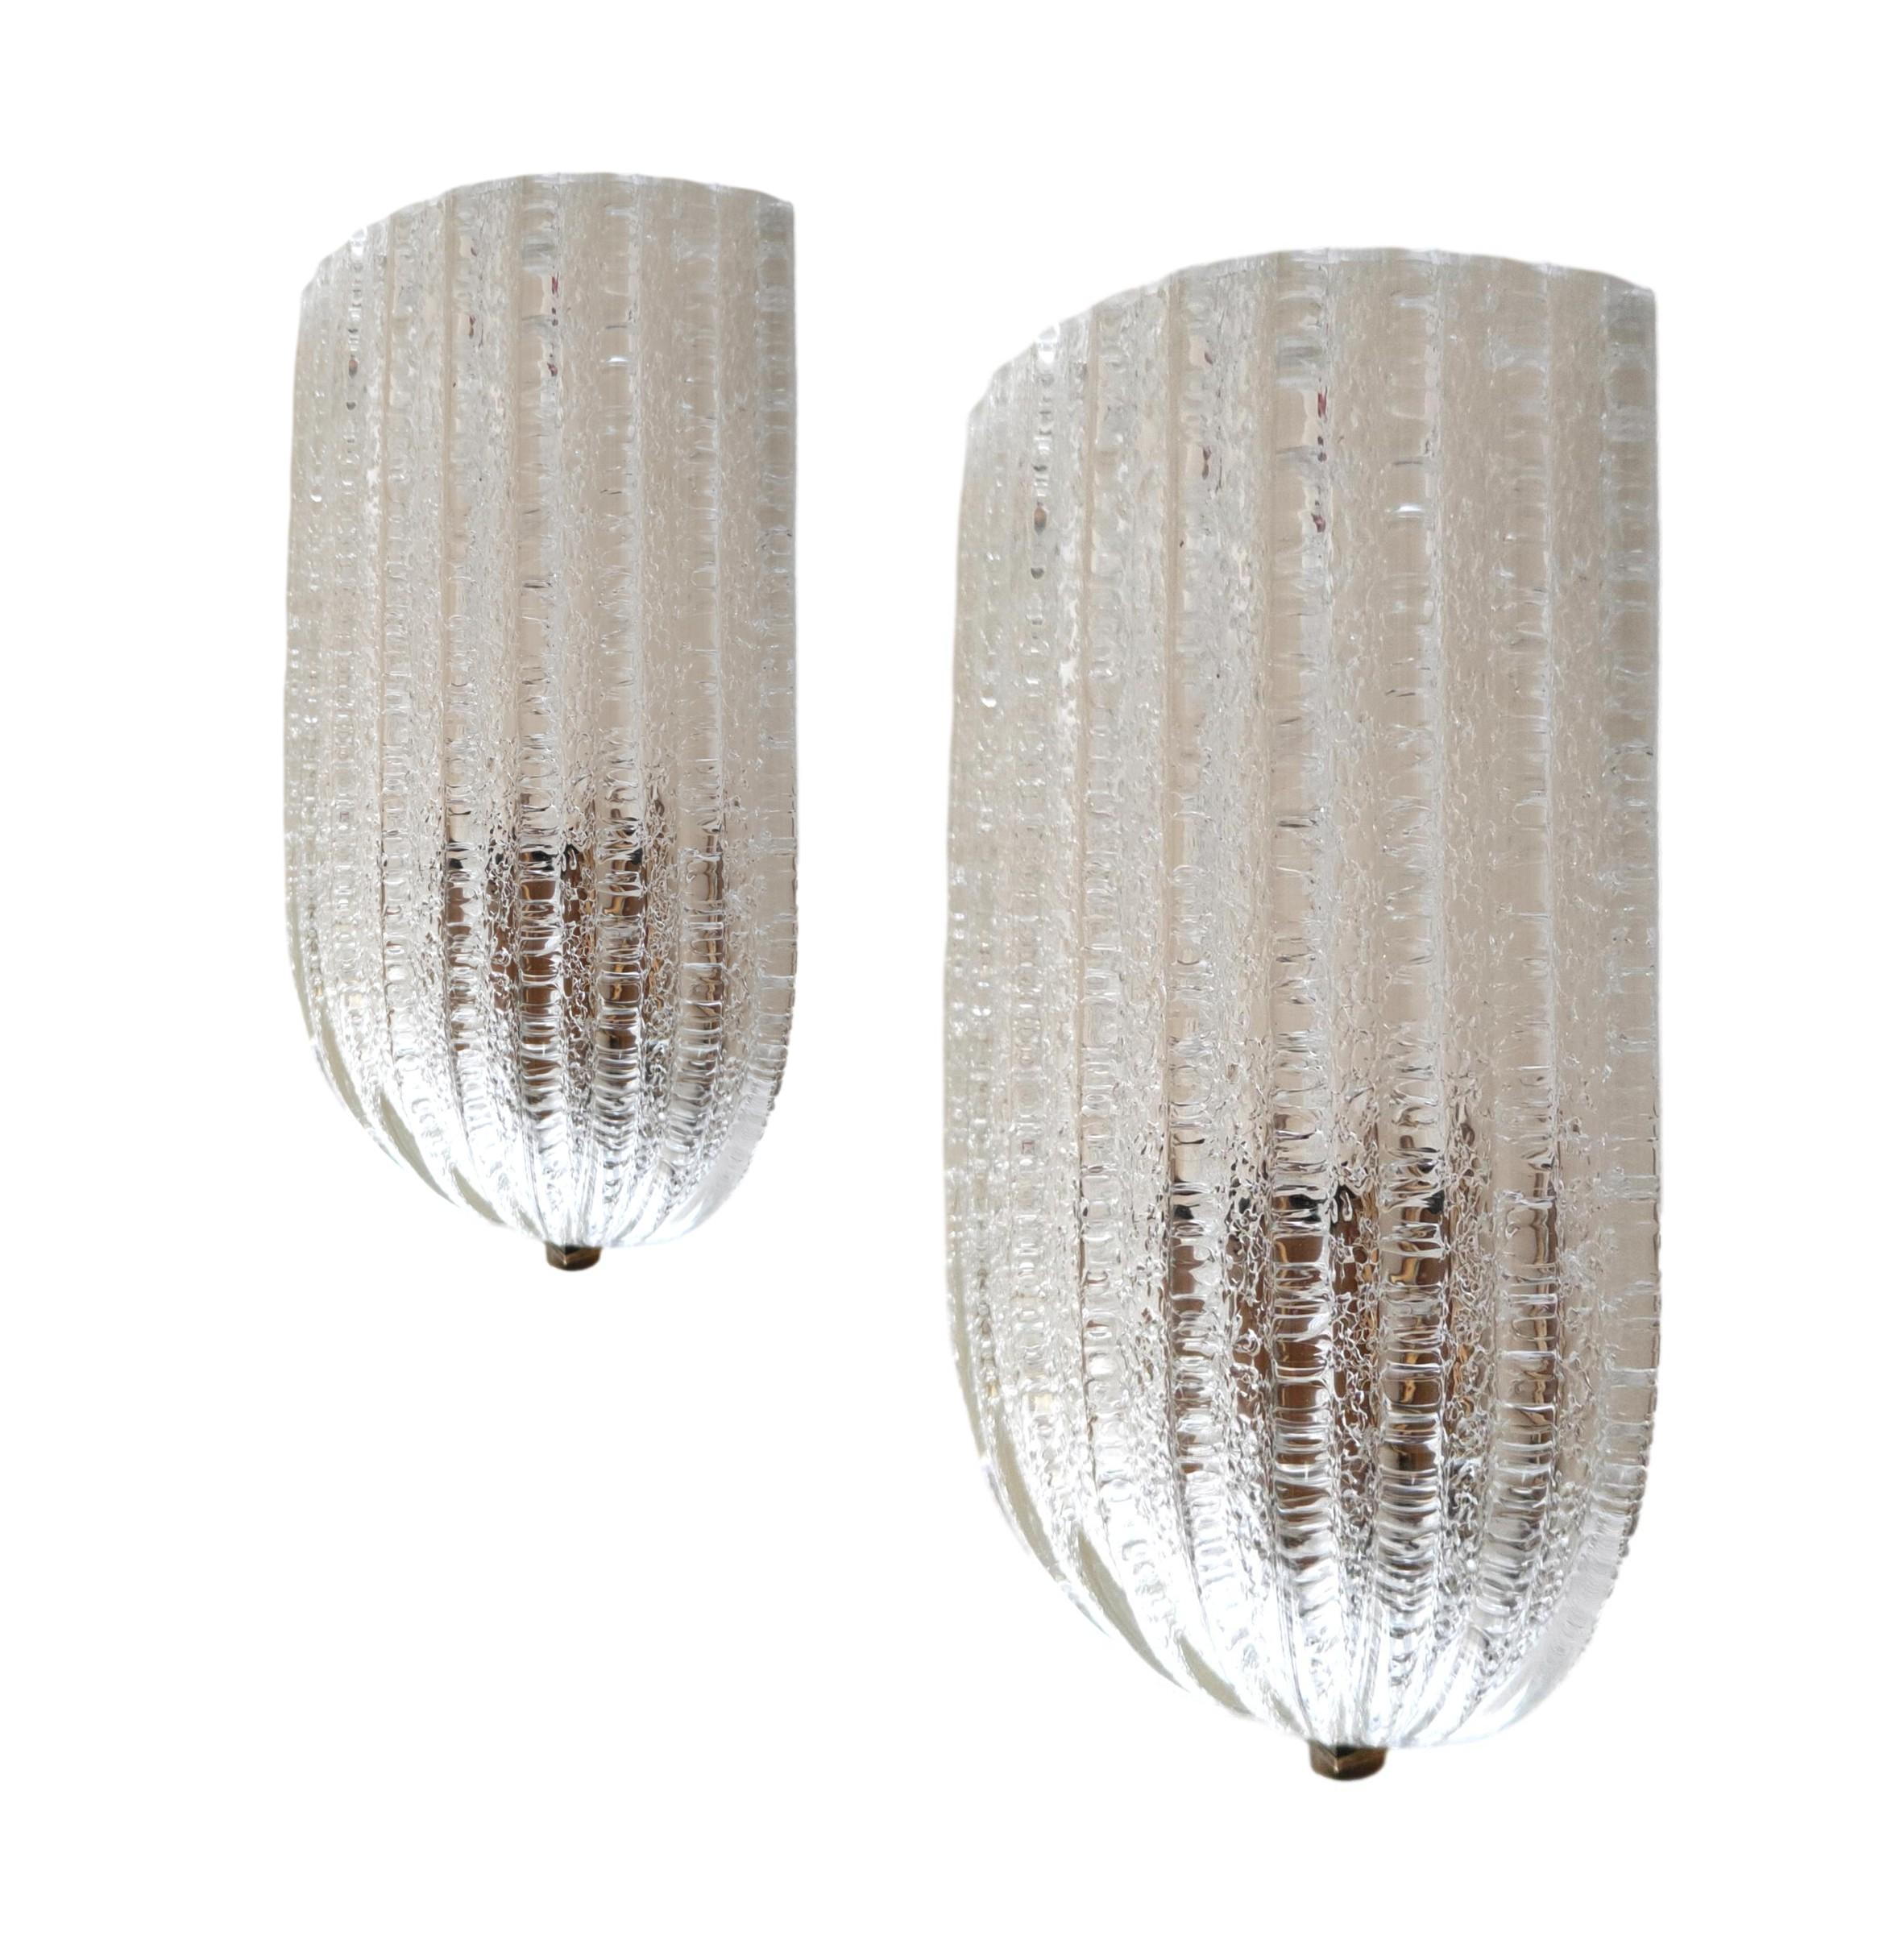 pair of wall lamps sconces barovier&toso 1950s - barovier & toso In Good Condition For Sale In taranto, IT